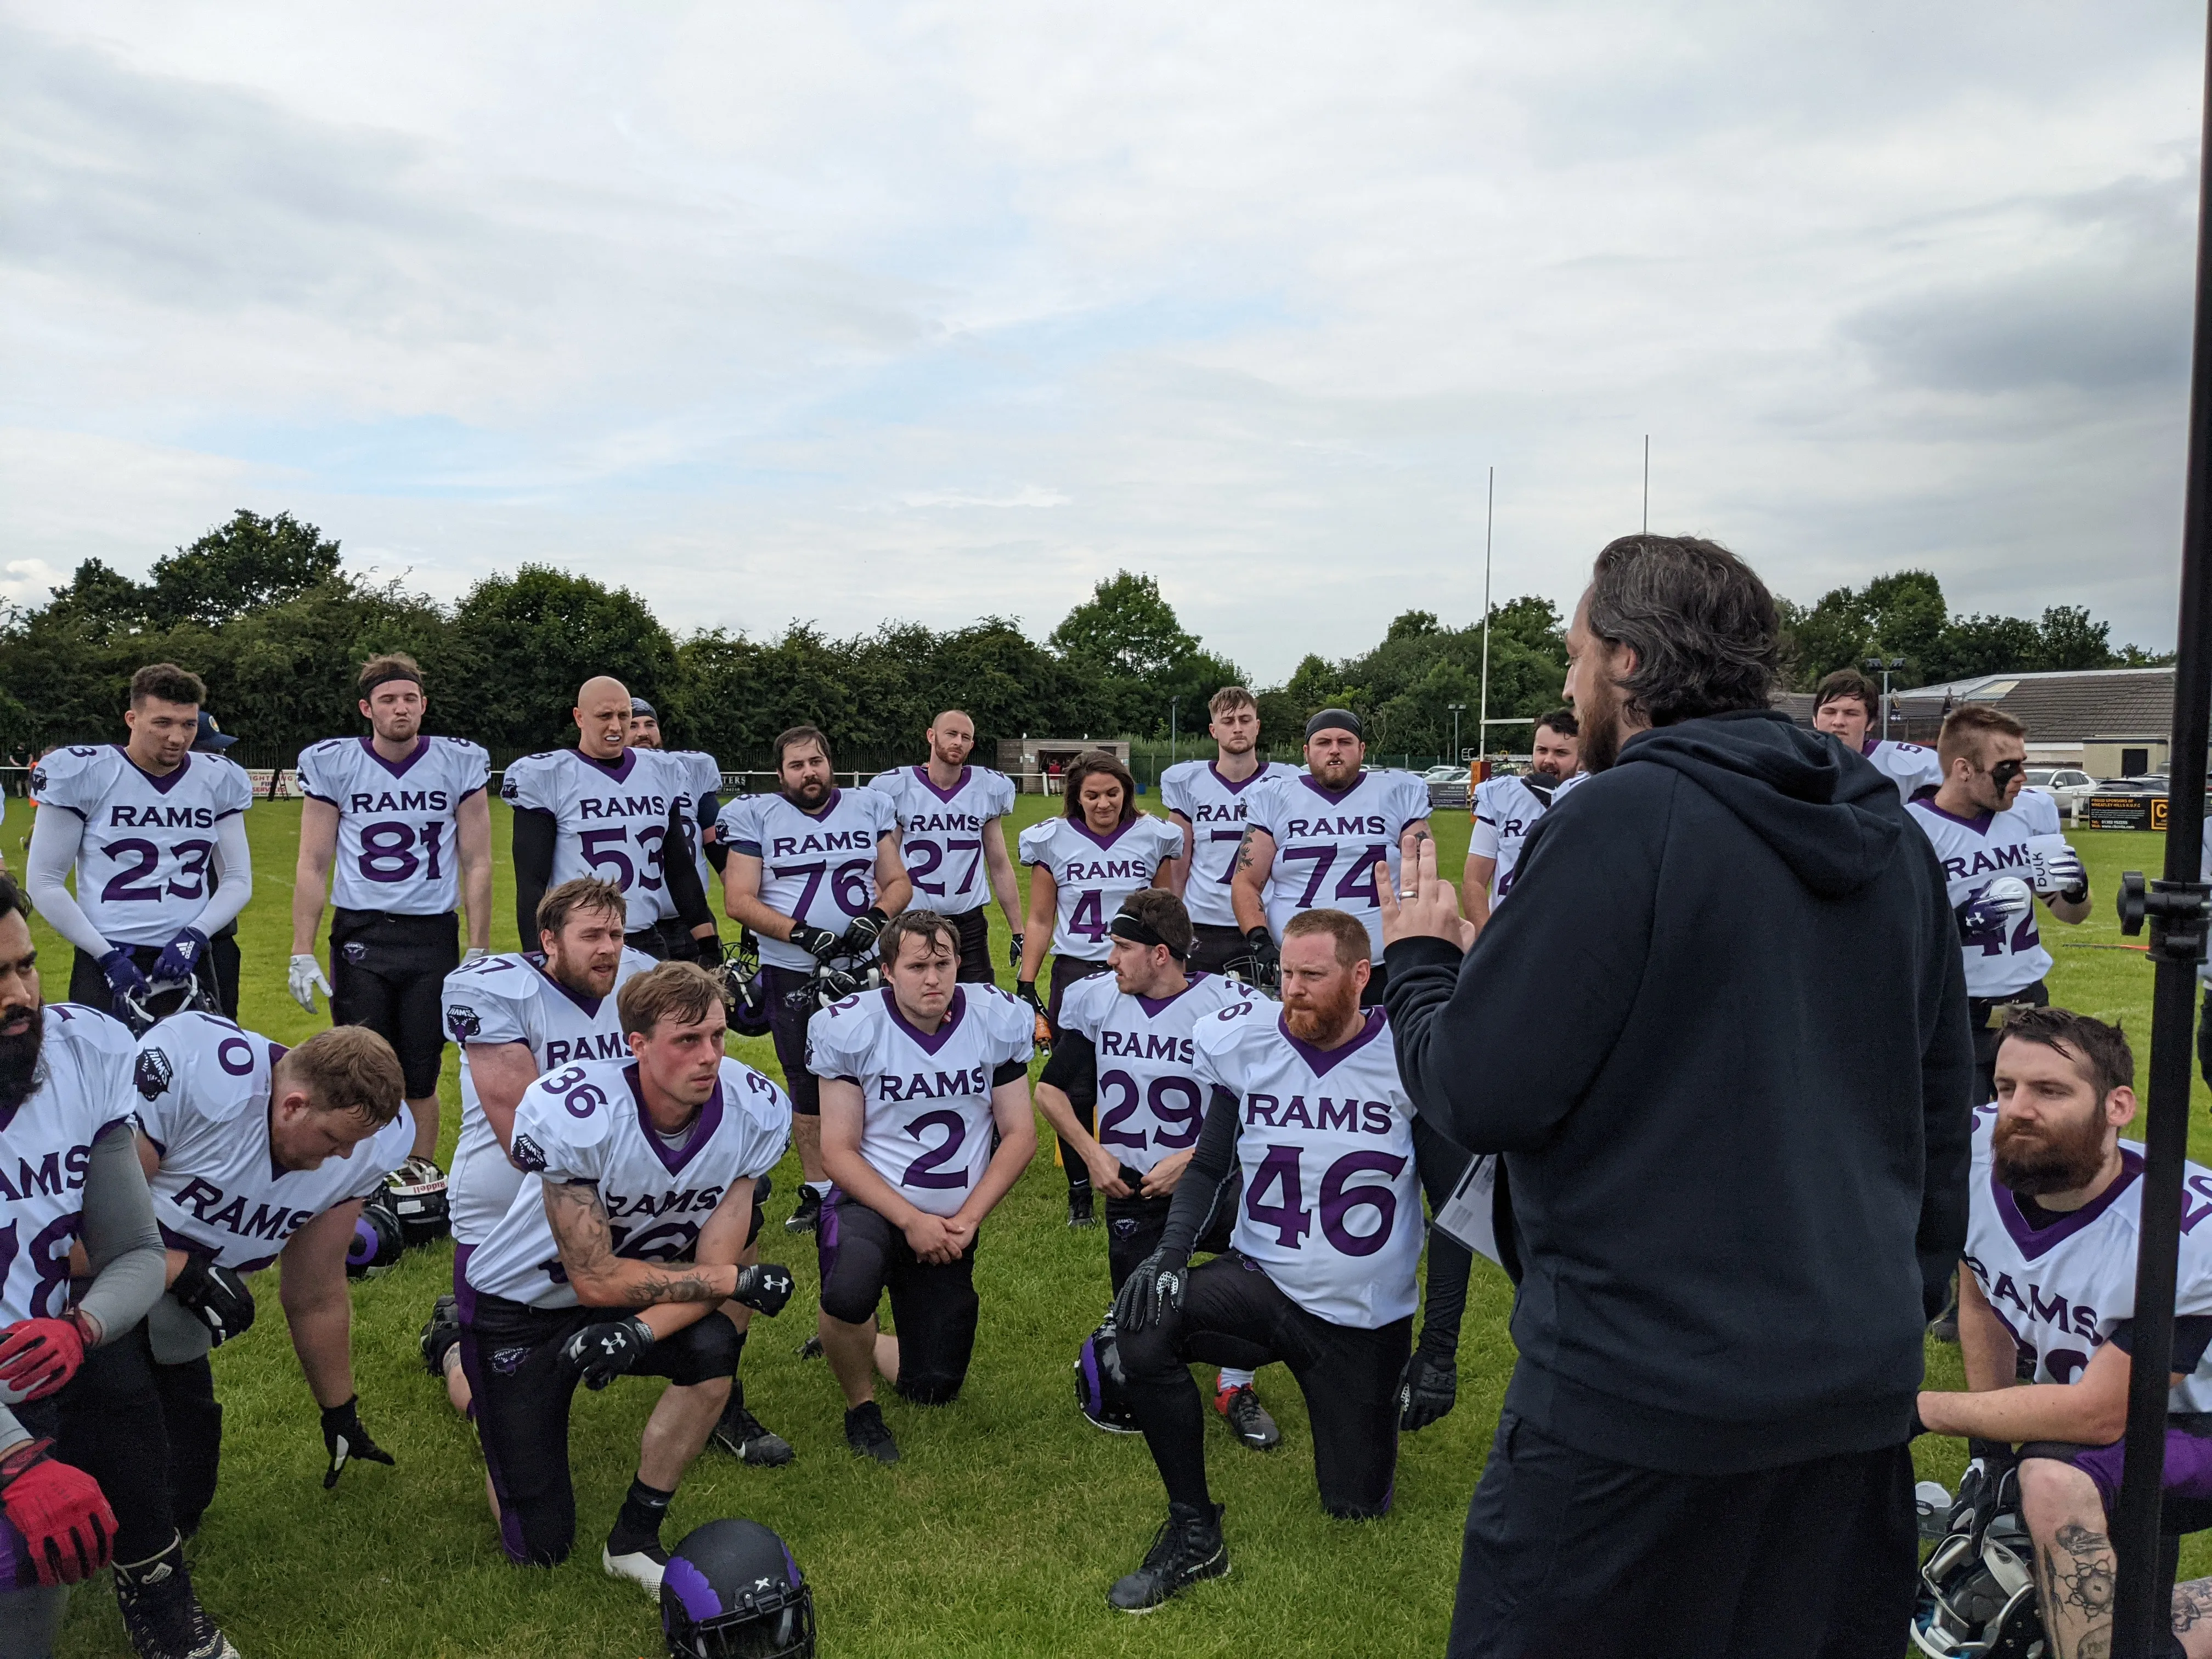 Doncaster Mustangs 0 - 57 Yorkshire Academy Rams